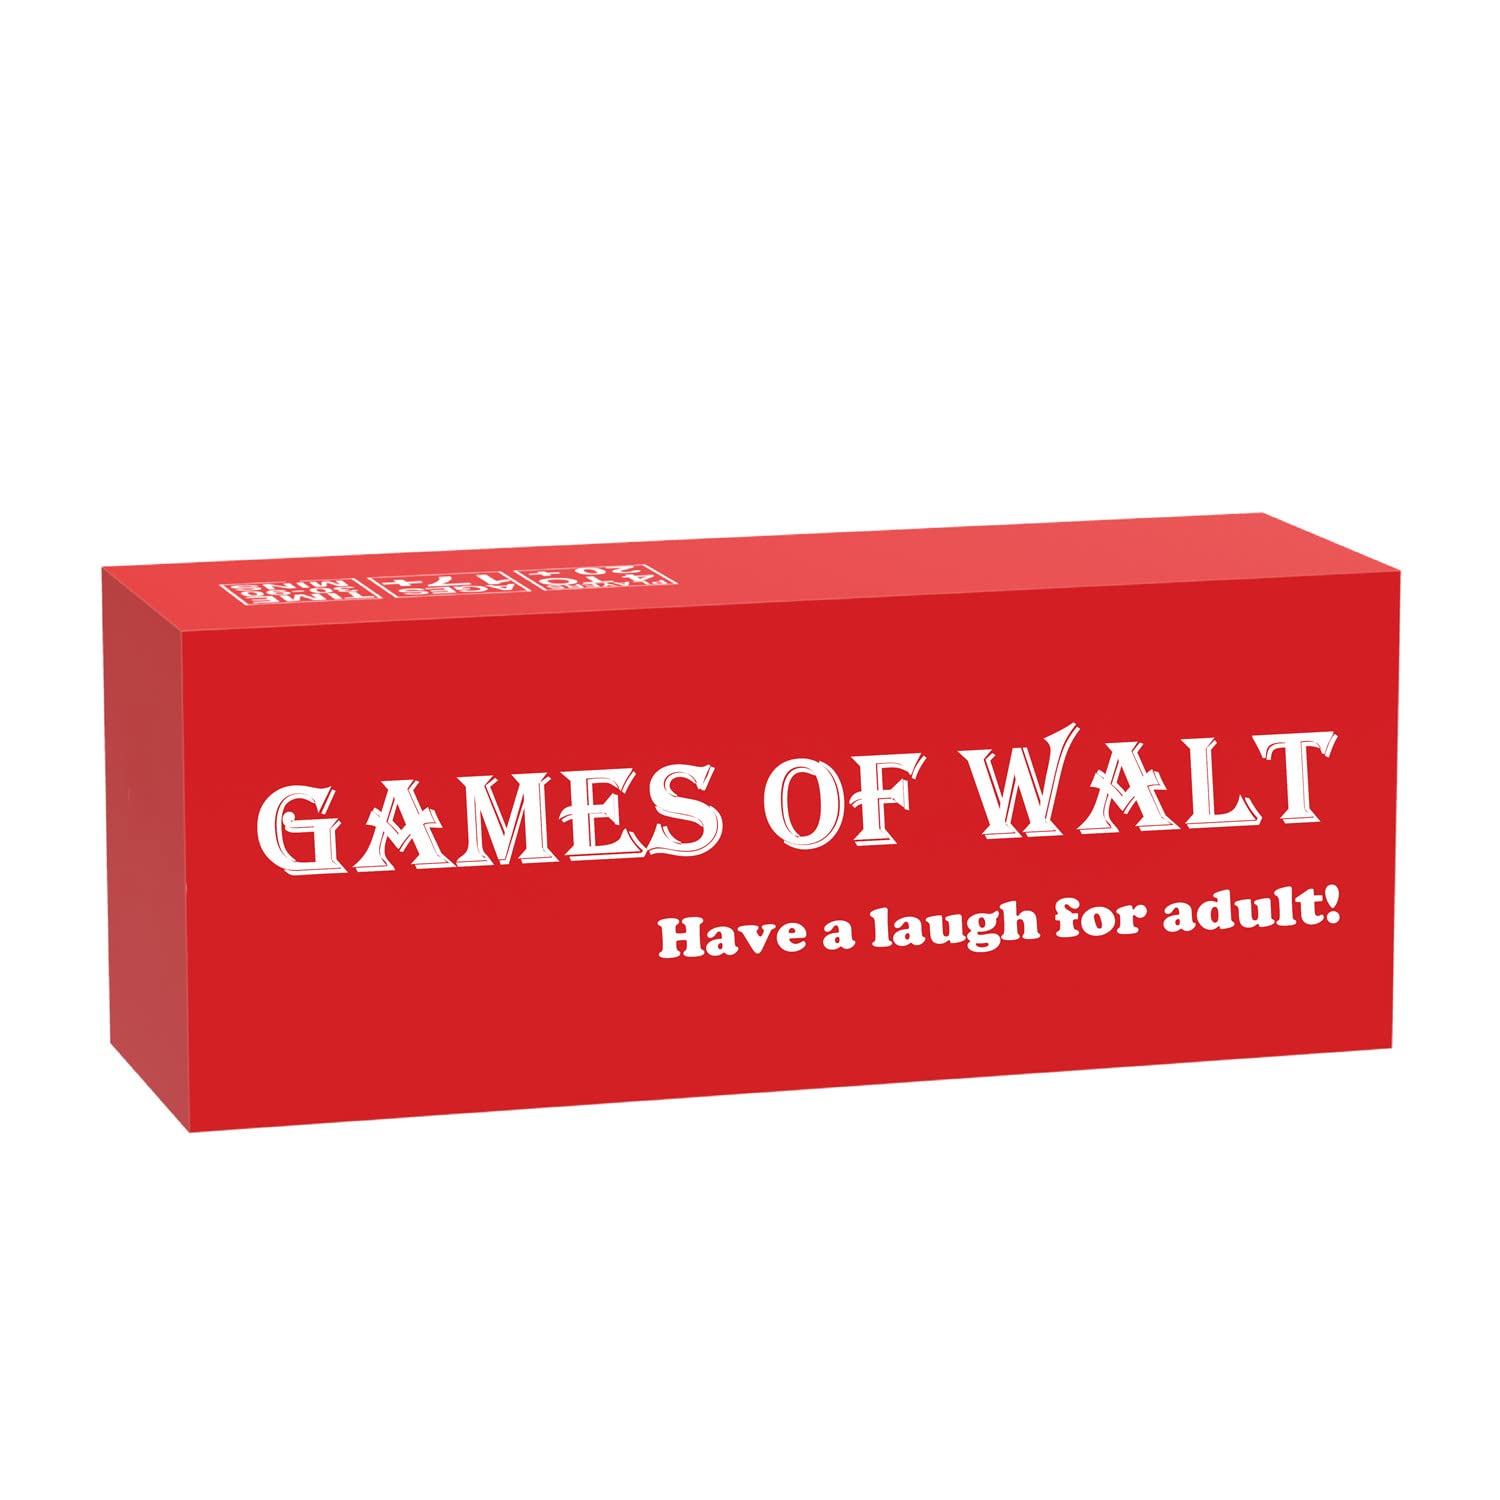 Badzjokes Cards Games of Walt Edition - Have a Laugh for Adult! New Party Game for Friends.